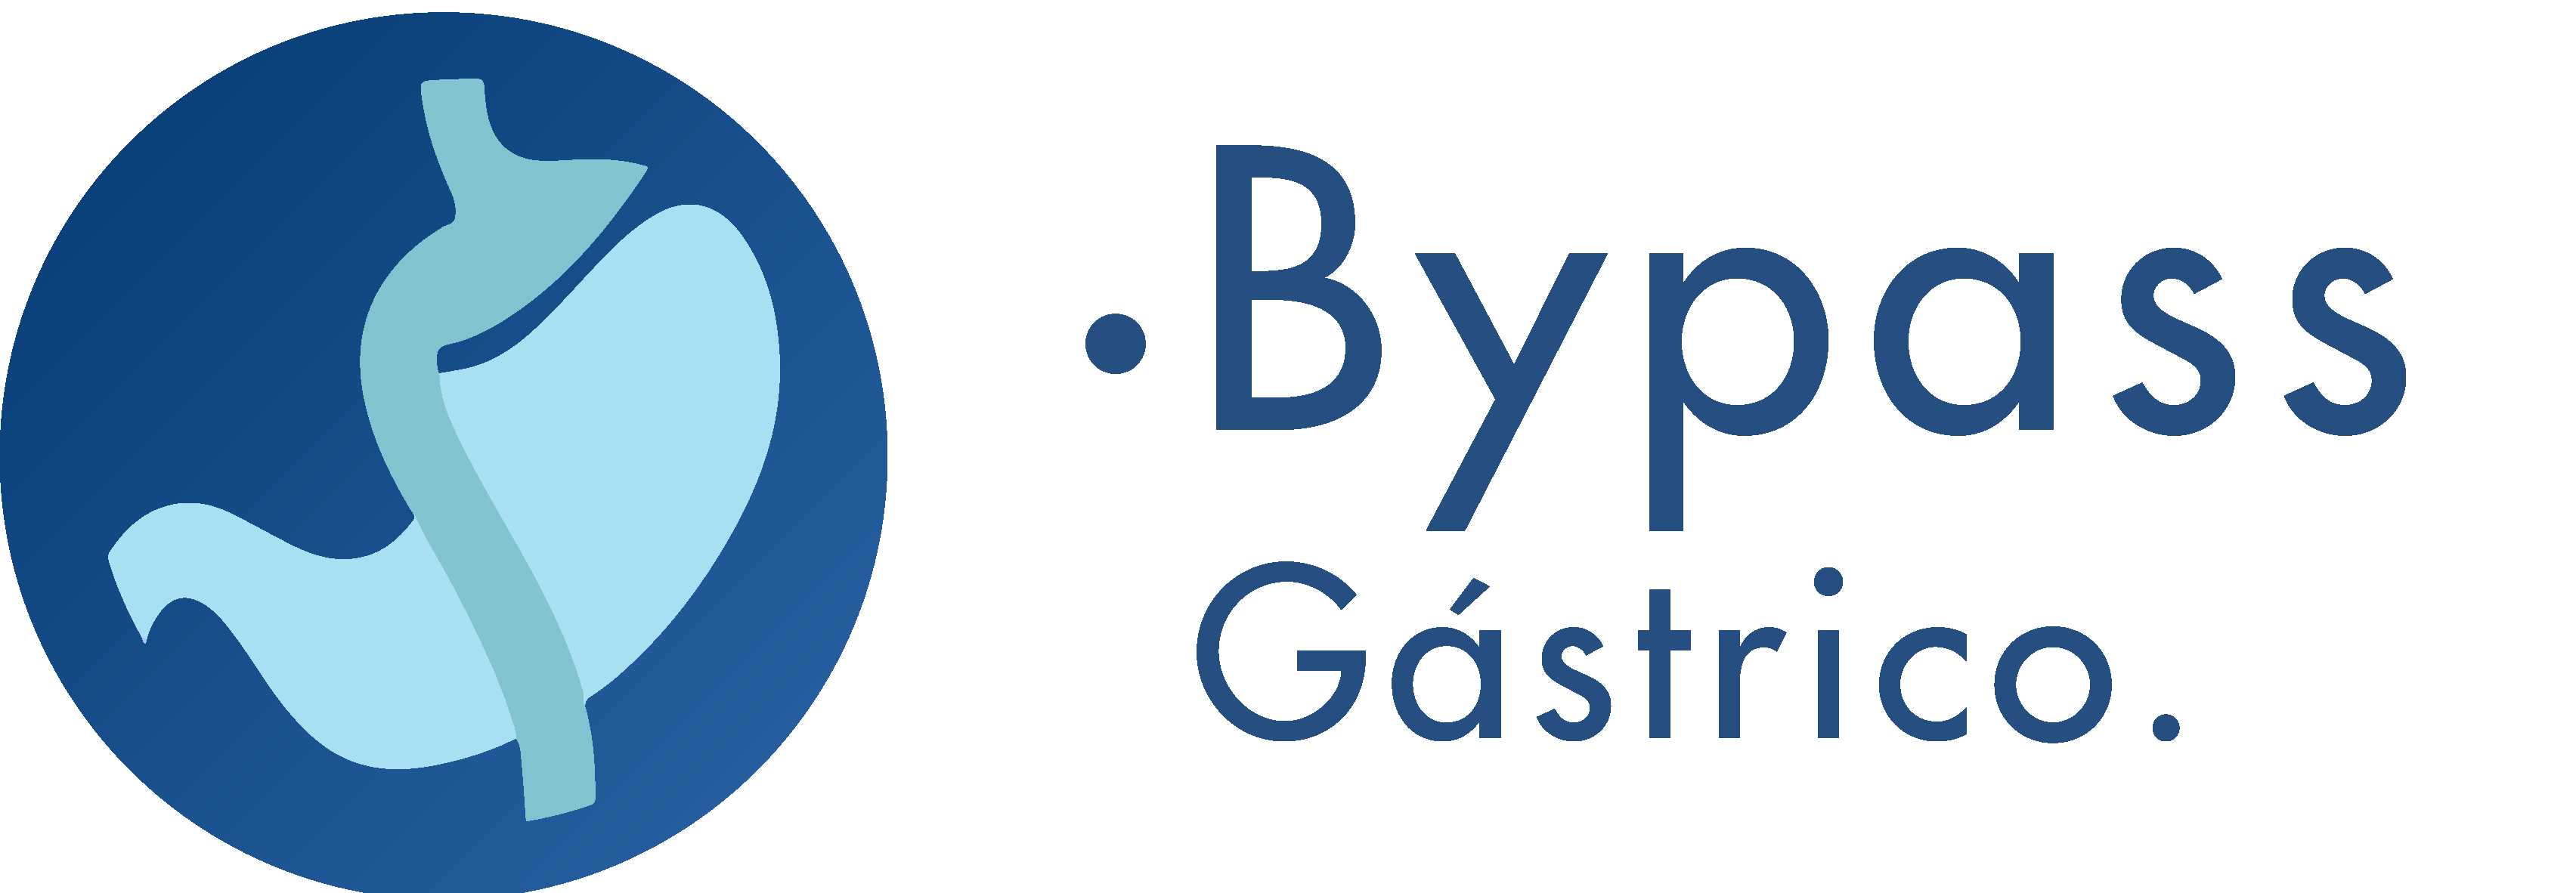 Bypass Gastrico